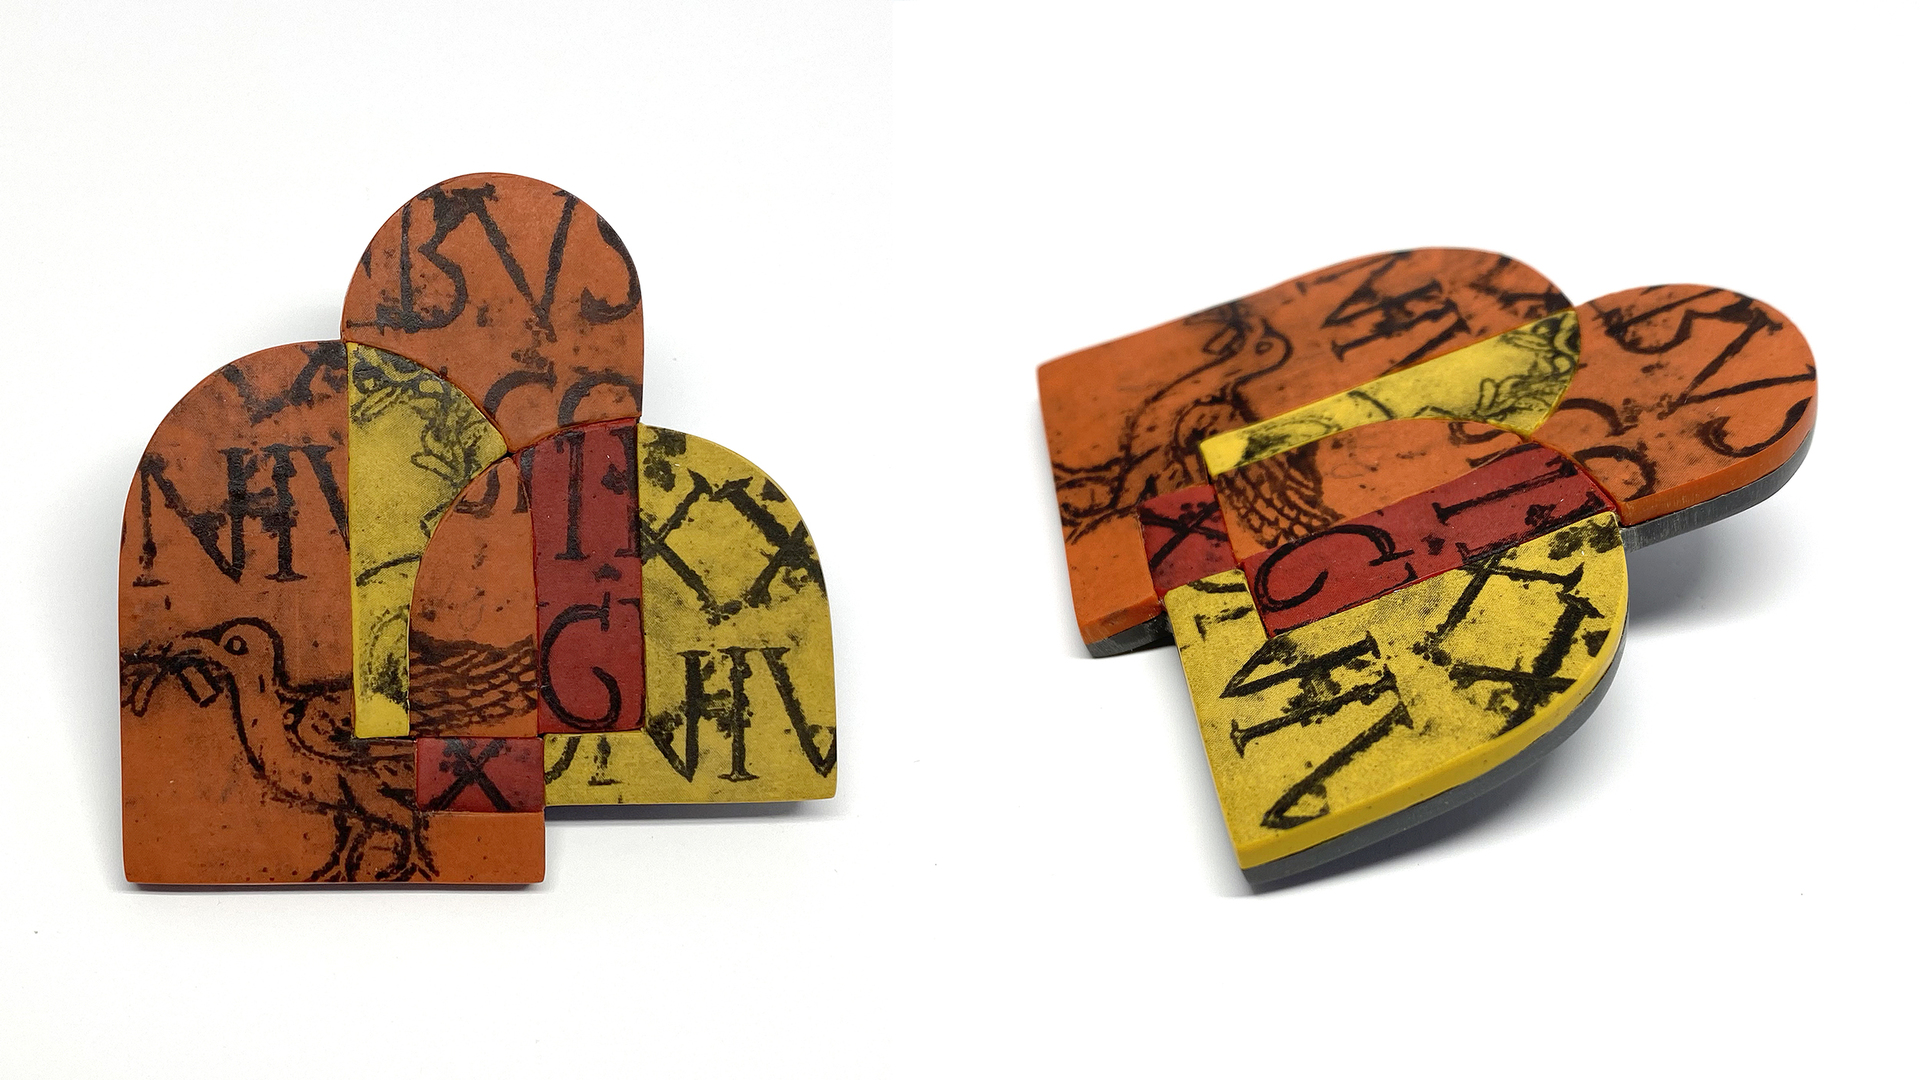 Clay object of 3 overlapping arches of different heights and widths. Two are orange and one is yellow, but the overlpping areas are yellow, red, and orange. There are black letterforms and a drawing of a bird on the piece.